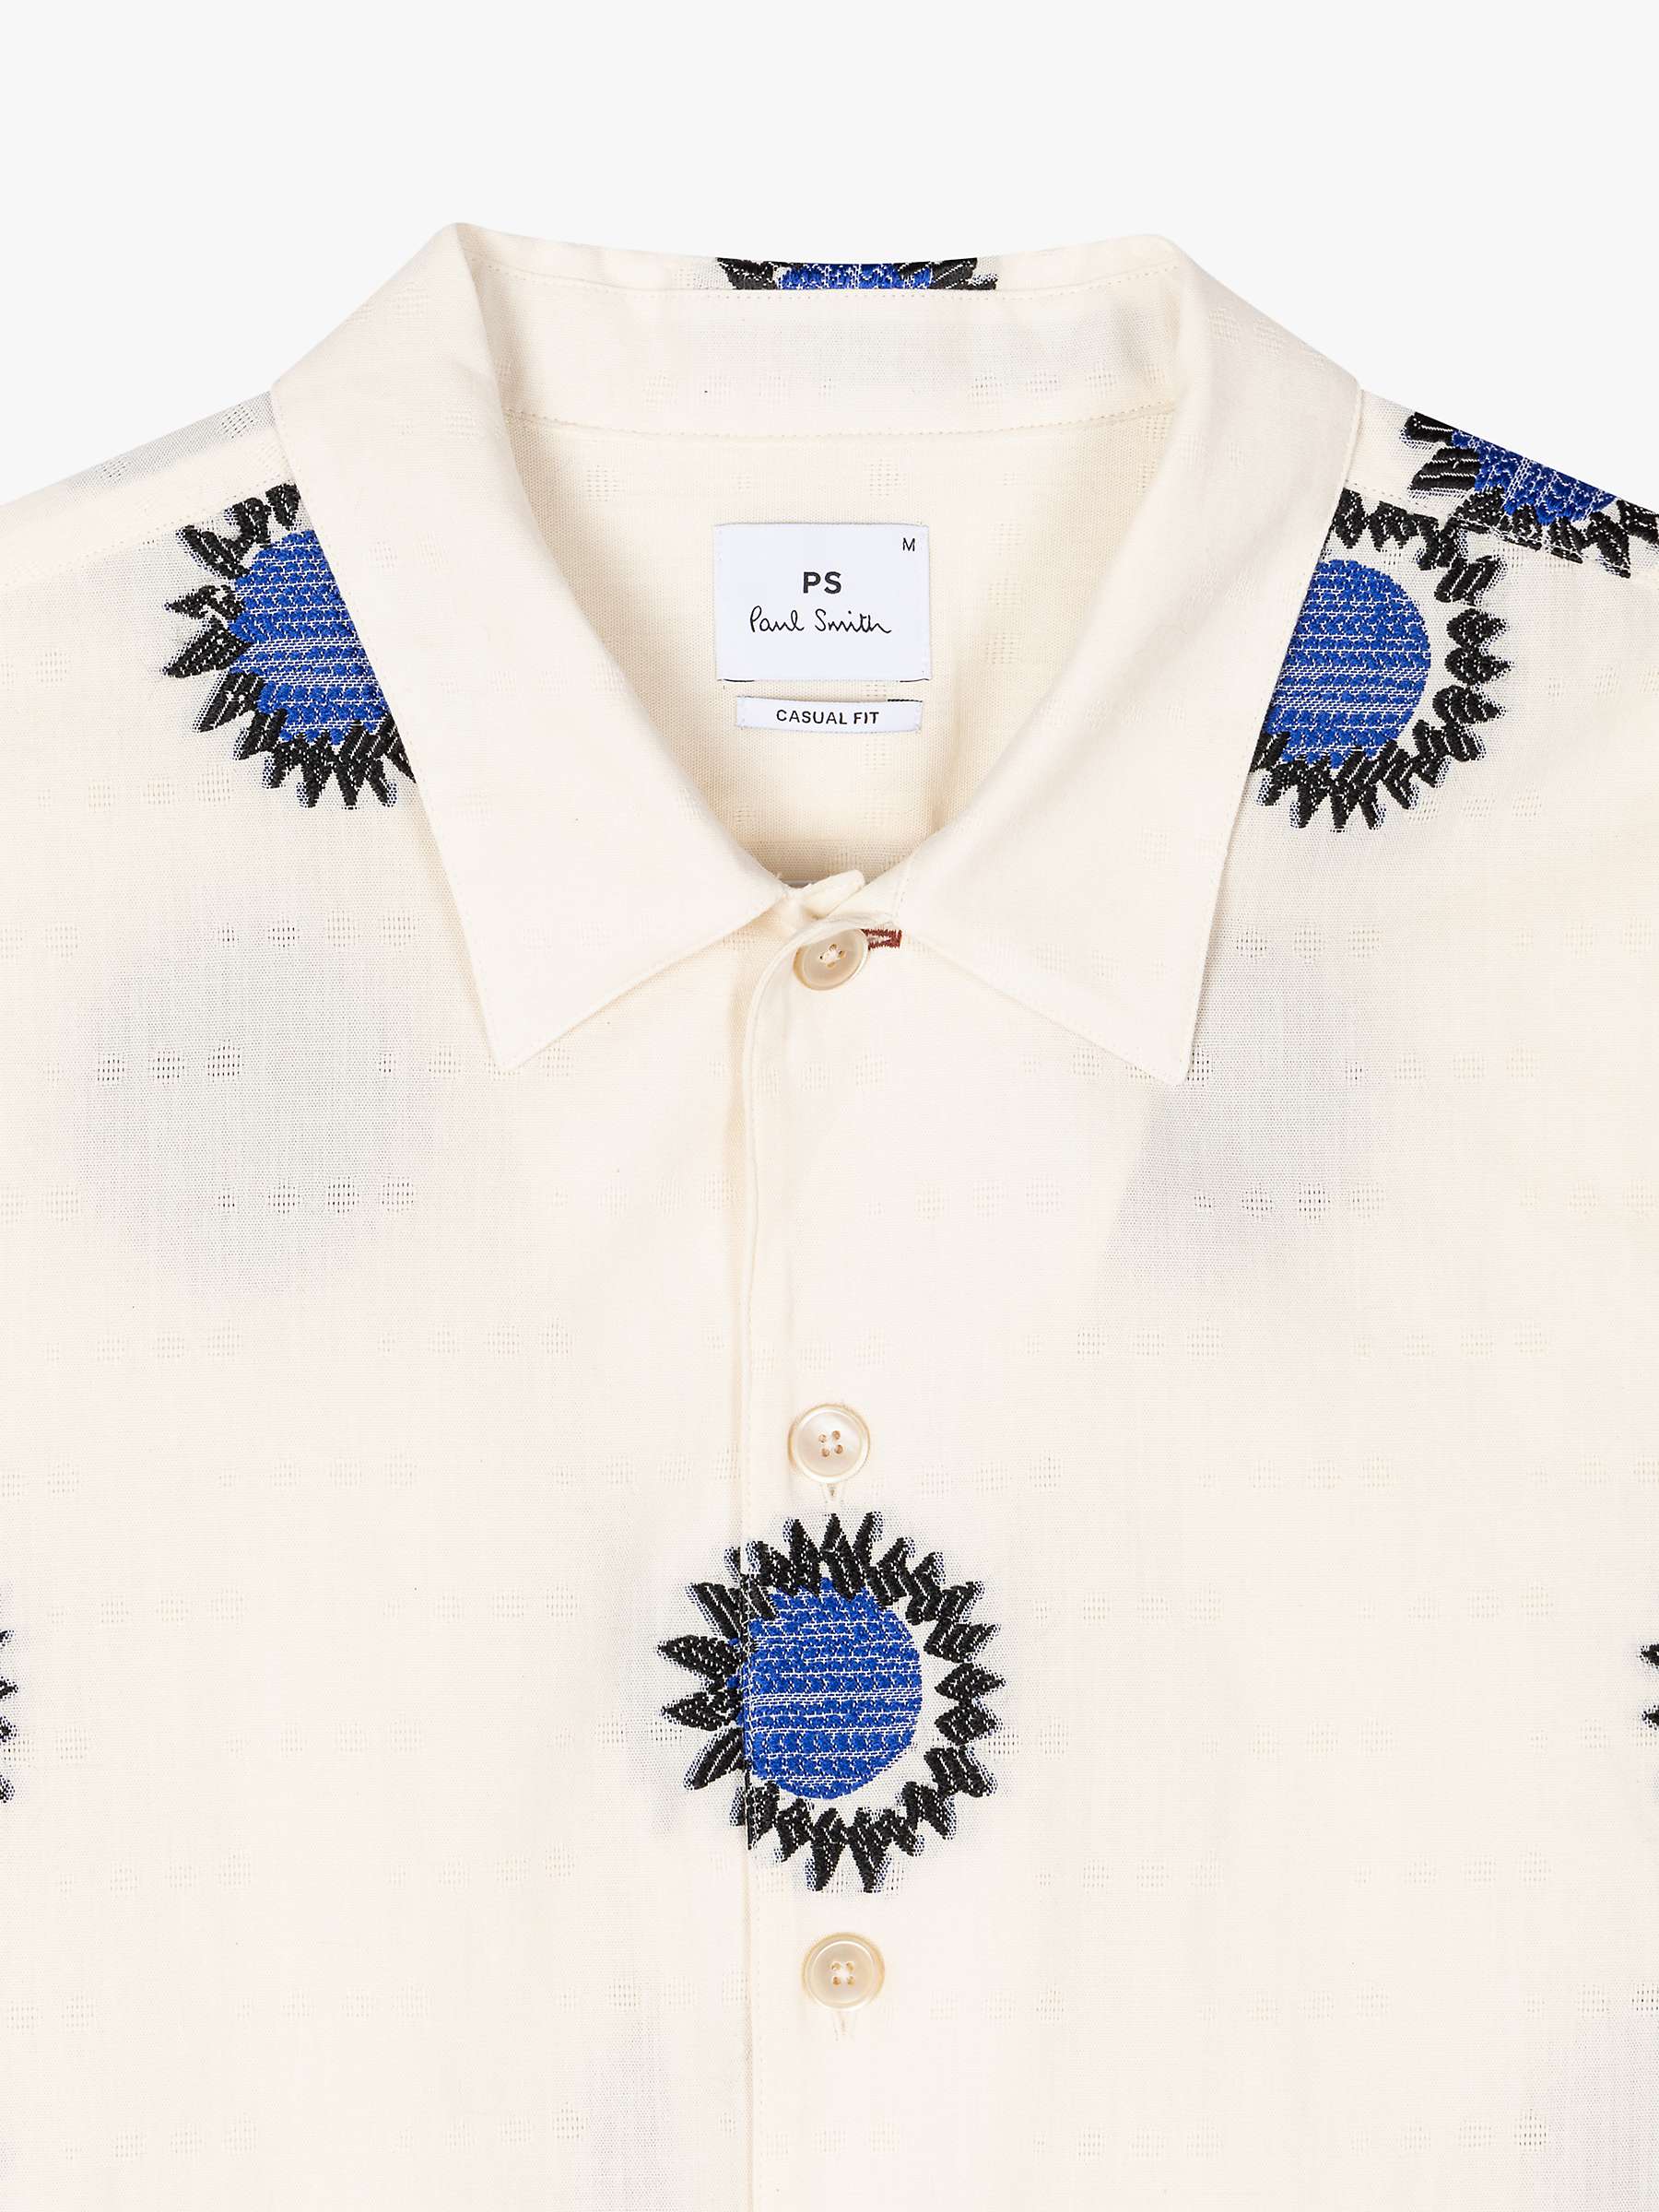 Buy PS Paul Smith Short Sleeve Casual Fit Shirt, White/Multi Online at johnlewis.com